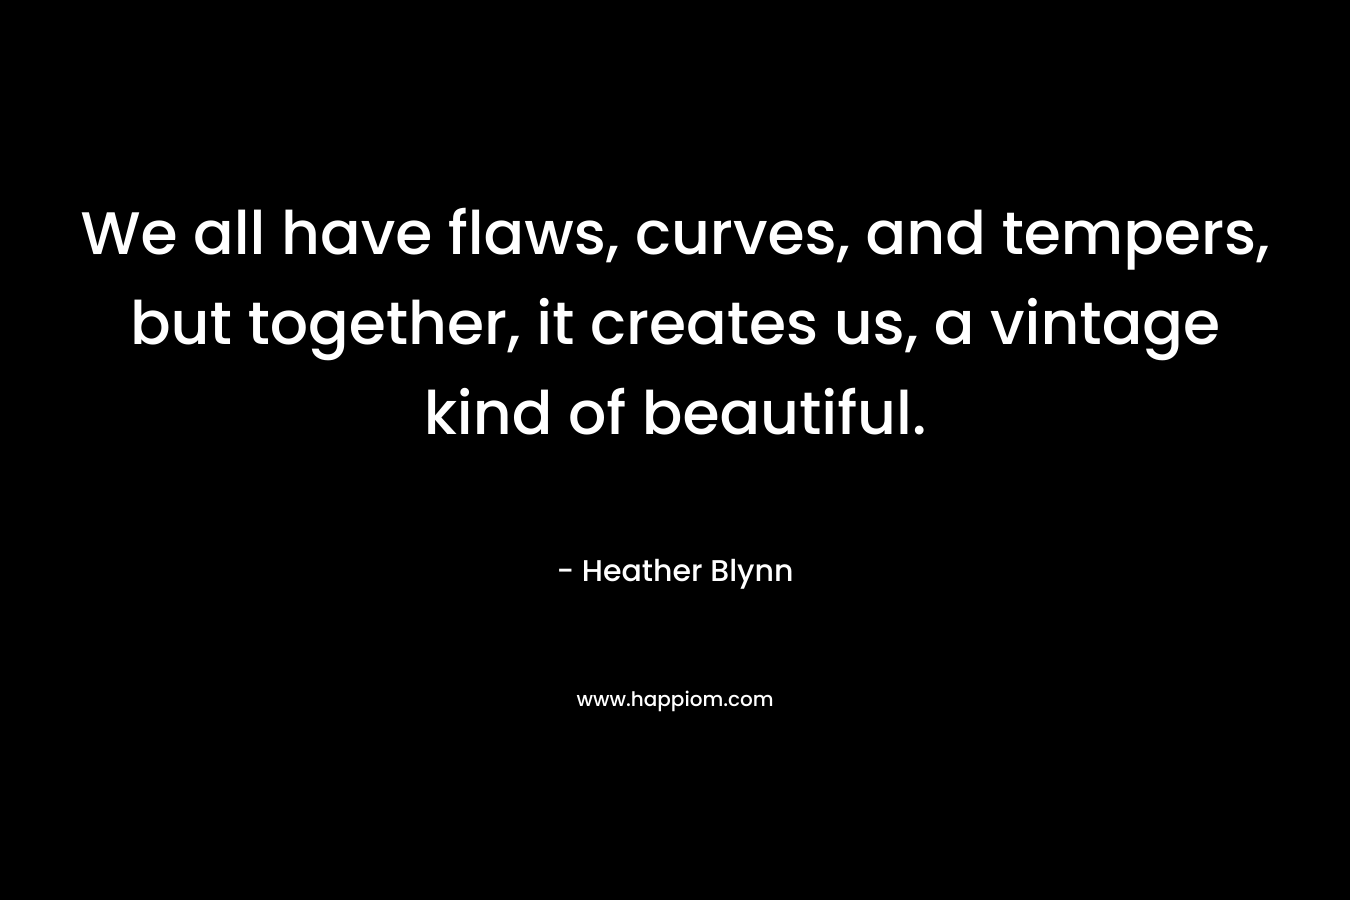 We all have flaws, curves, and tempers, but together, it creates us, a vintage kind of beautiful. – Heather Blynn